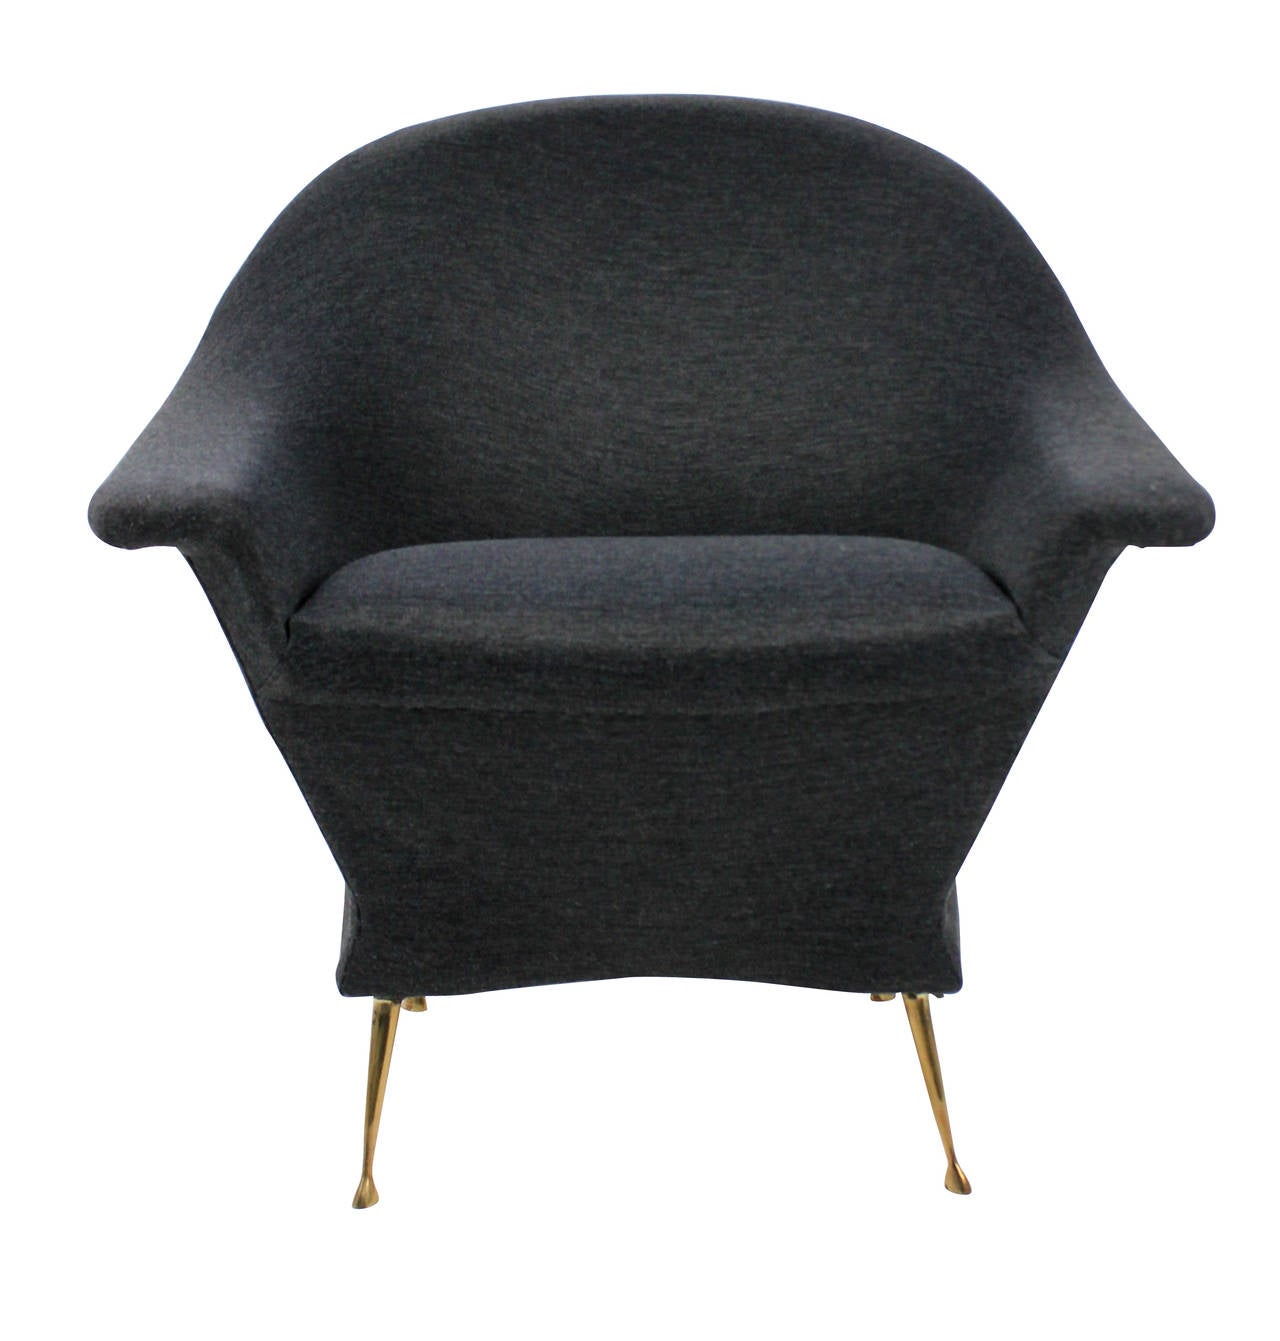 An Italian sculptural armchair on brass legs, newly upholstered in Romo fabric.